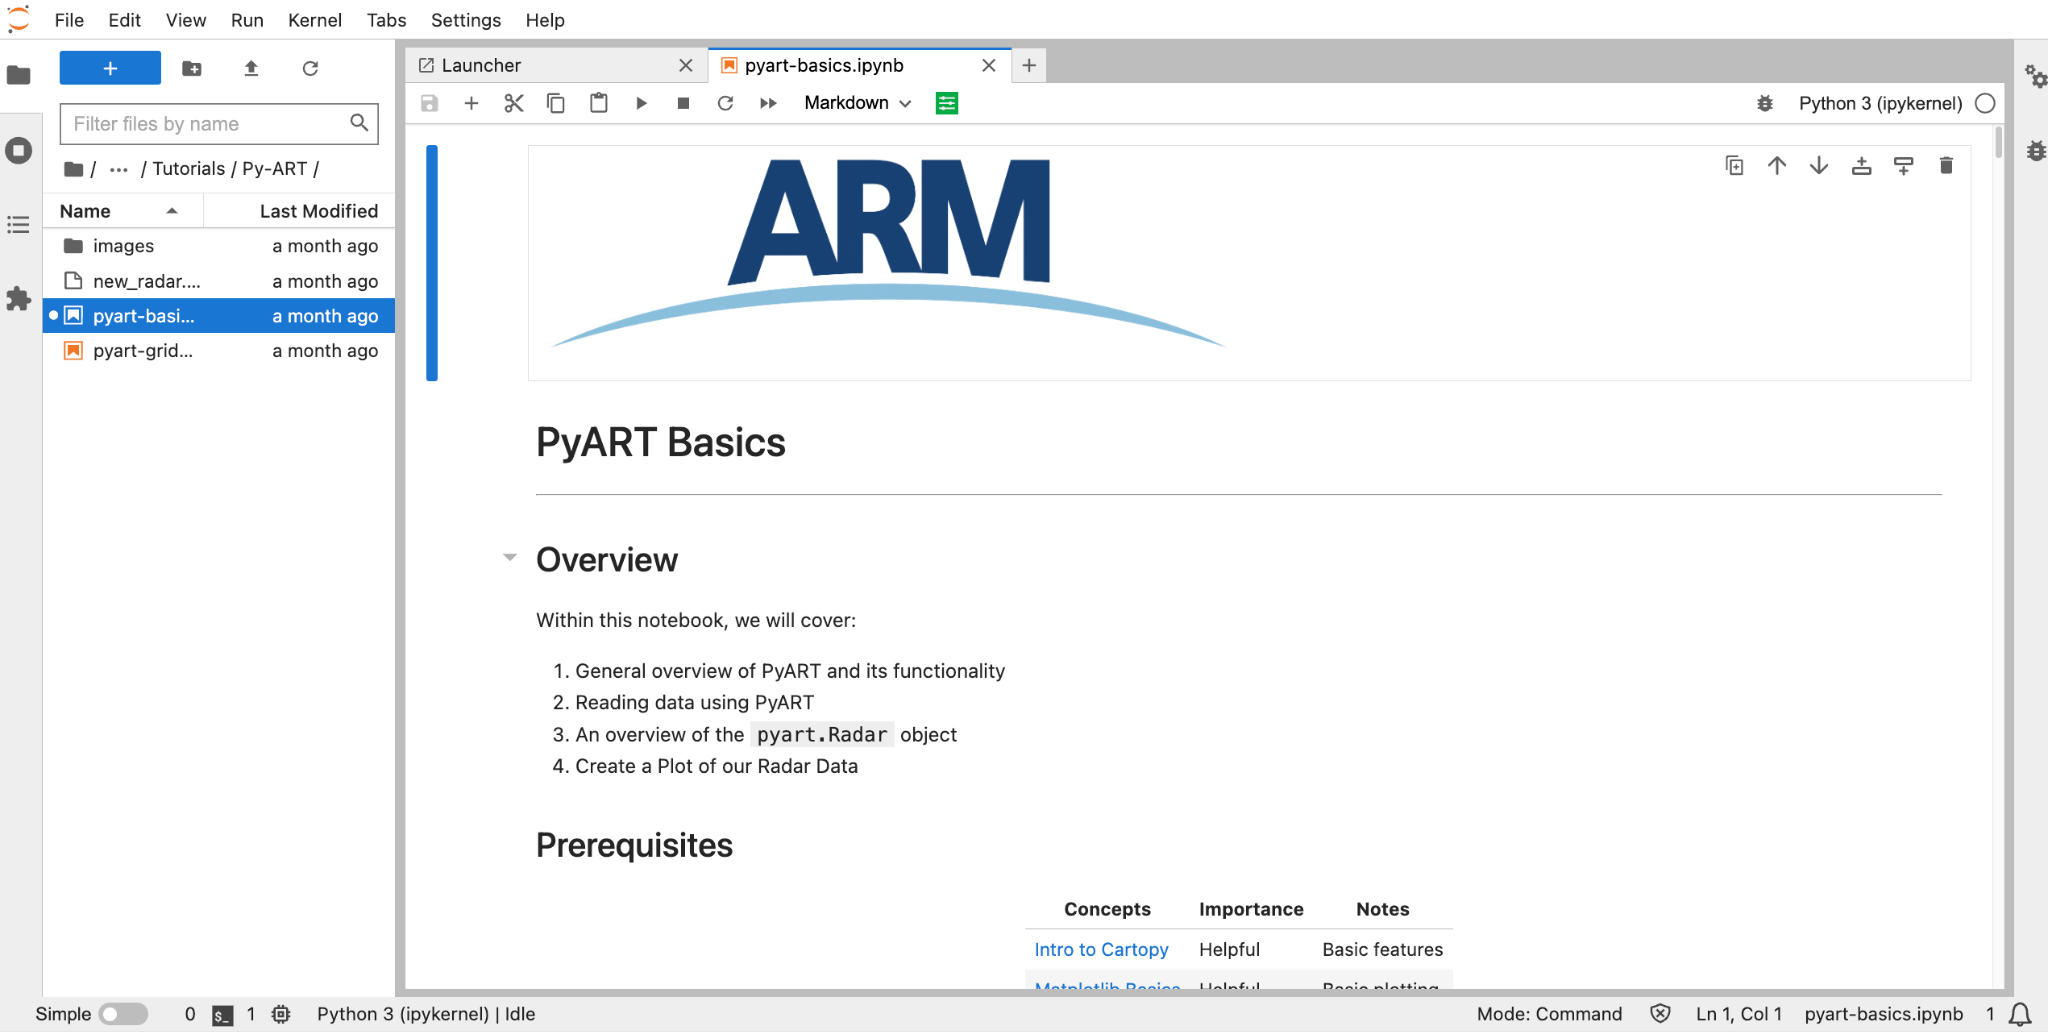 A screen grab shows PyART Basics and an overview screen of what the Jupyter Notebook will cover.